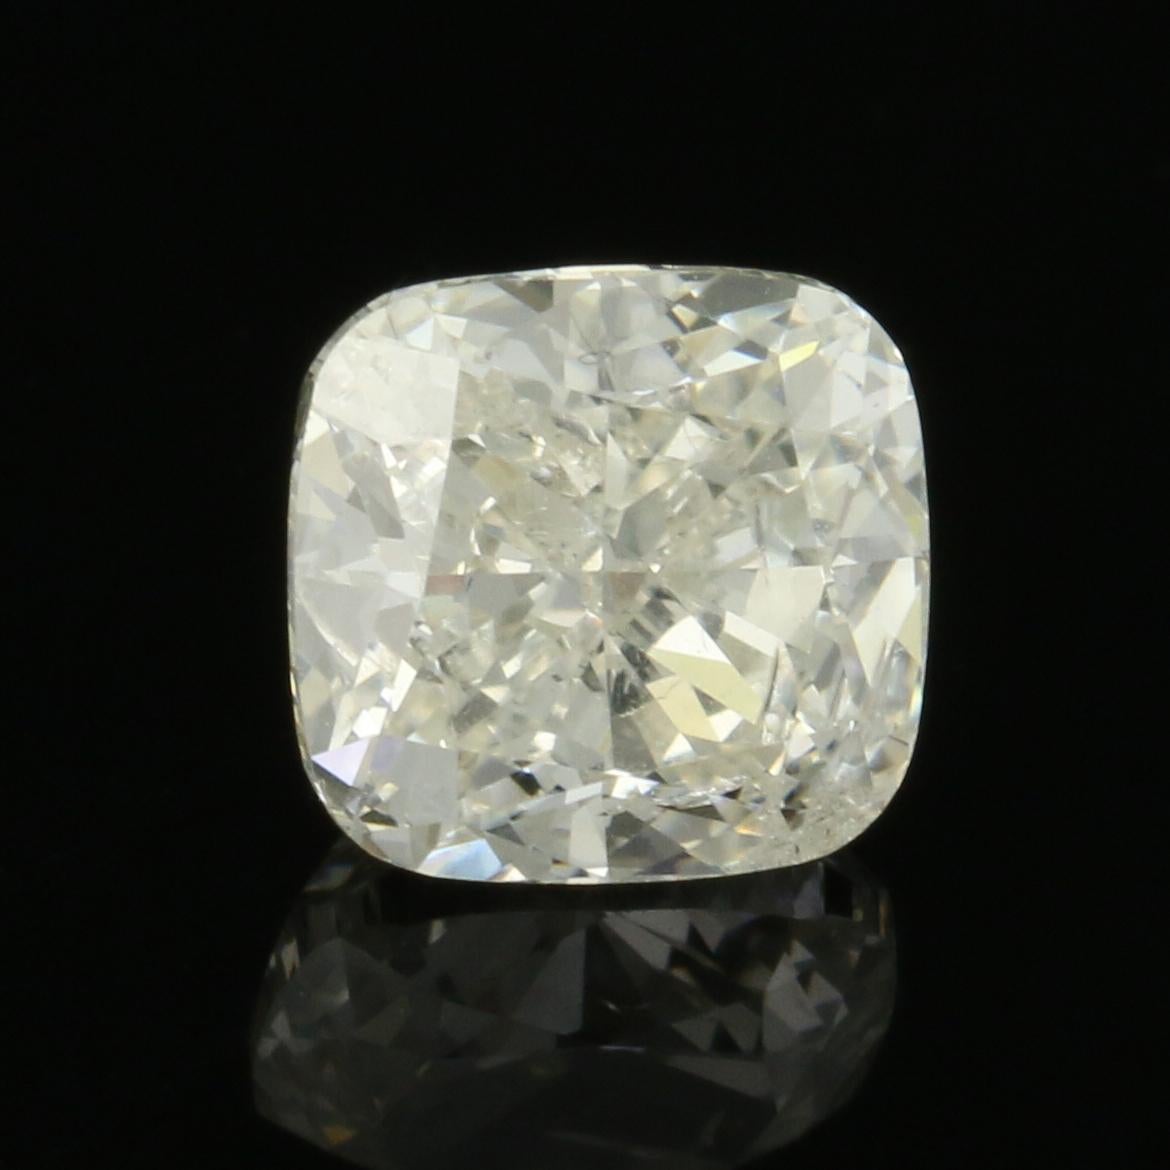 Shape/Cut: Cushion 
Clarity: I1 
Color: L 
Dimensions (mm): 5.84 x 5.62 x 3.88
Weight: 1.12ct 

GIA Report Number: 2193793328 

Please check out the enlarged pictures.

Thank you for taking the time to read our description. If you have any